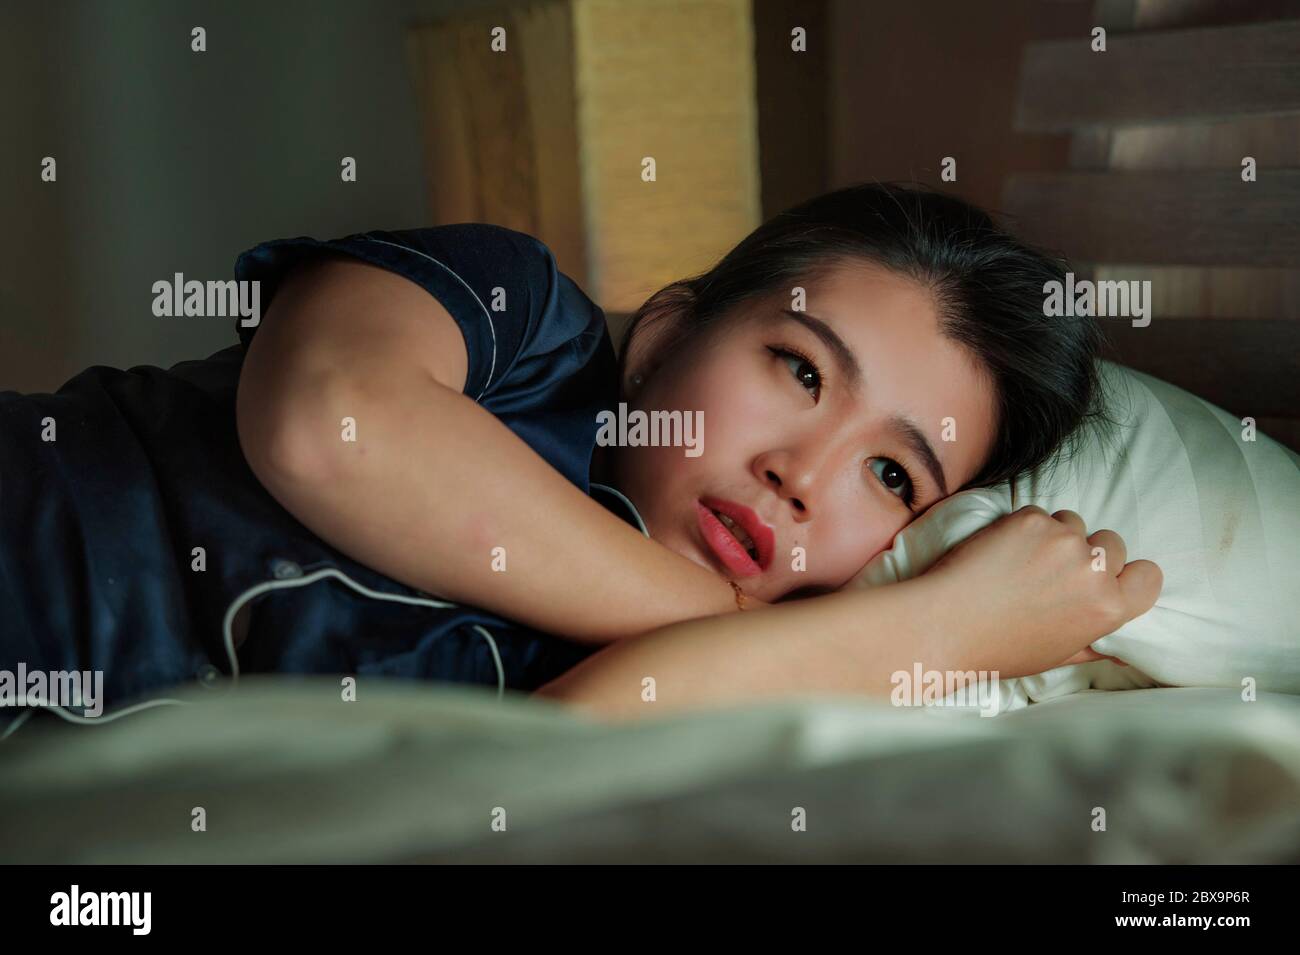 home lifestyle portrait of young beautiful sad and depressed Asian Chinese woman awake in bed late night suffering anxiety crisis and depression probl Stock Photo